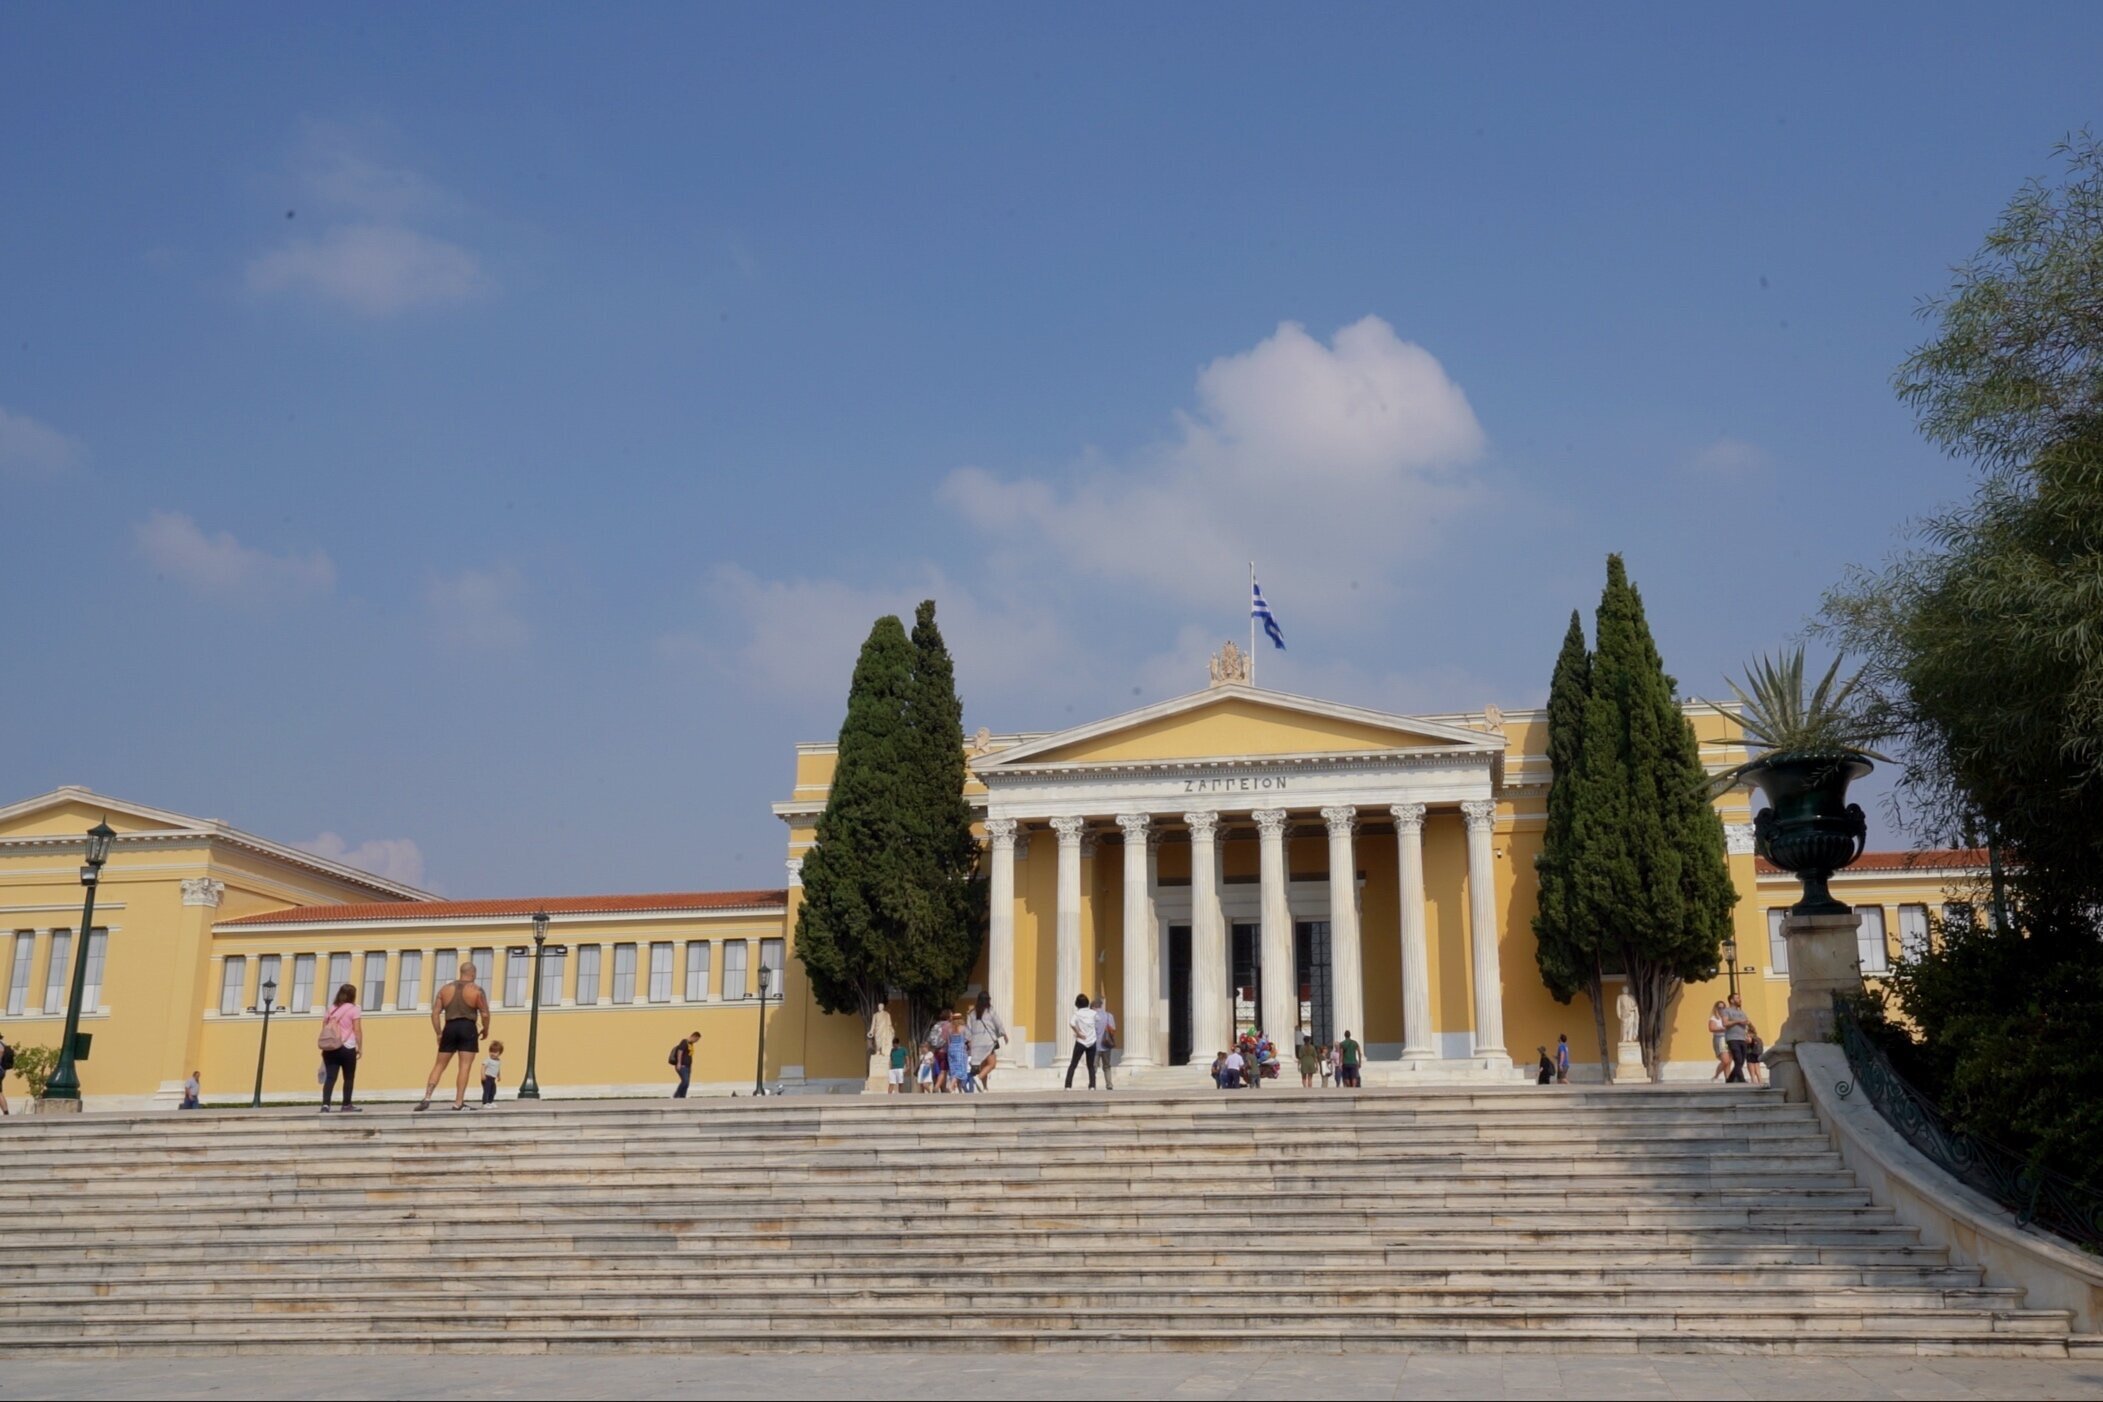  Zappeio Hall in the National Gardens.  